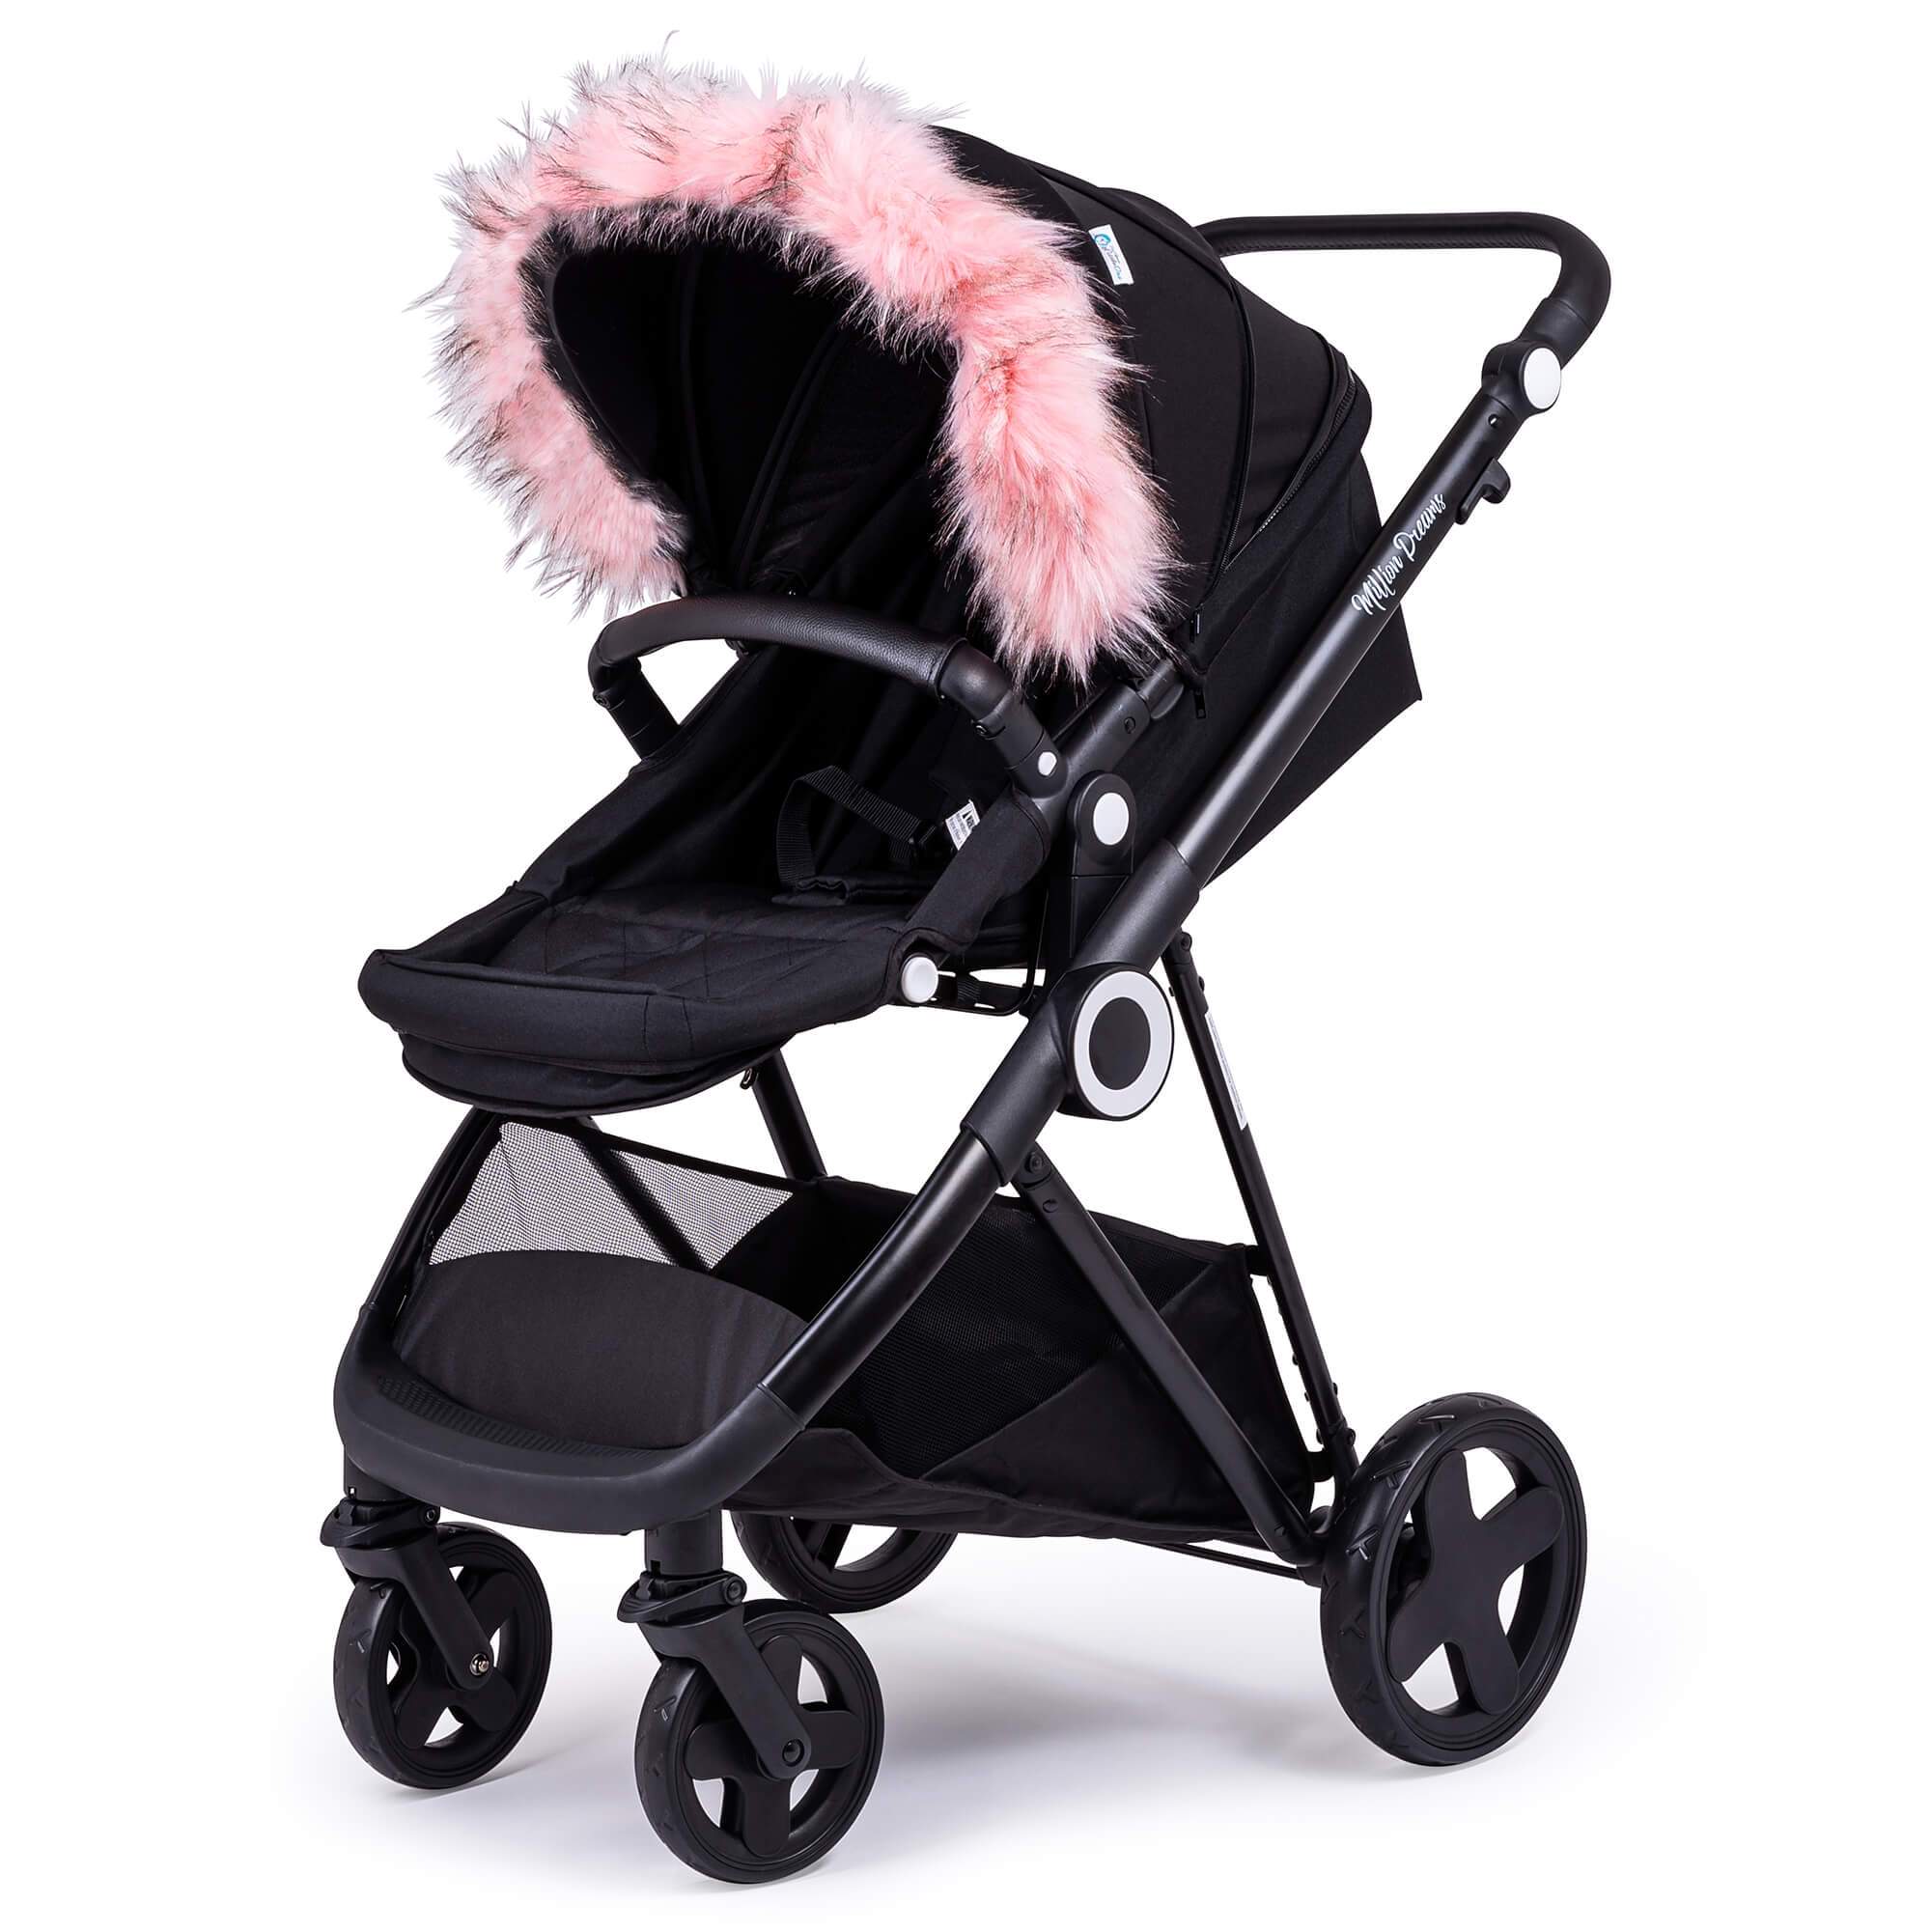 Pram Fur Hood Trim Attachment for Pushchair Compatible with Mima - Light Pink / Fits All Models | For Your Little One